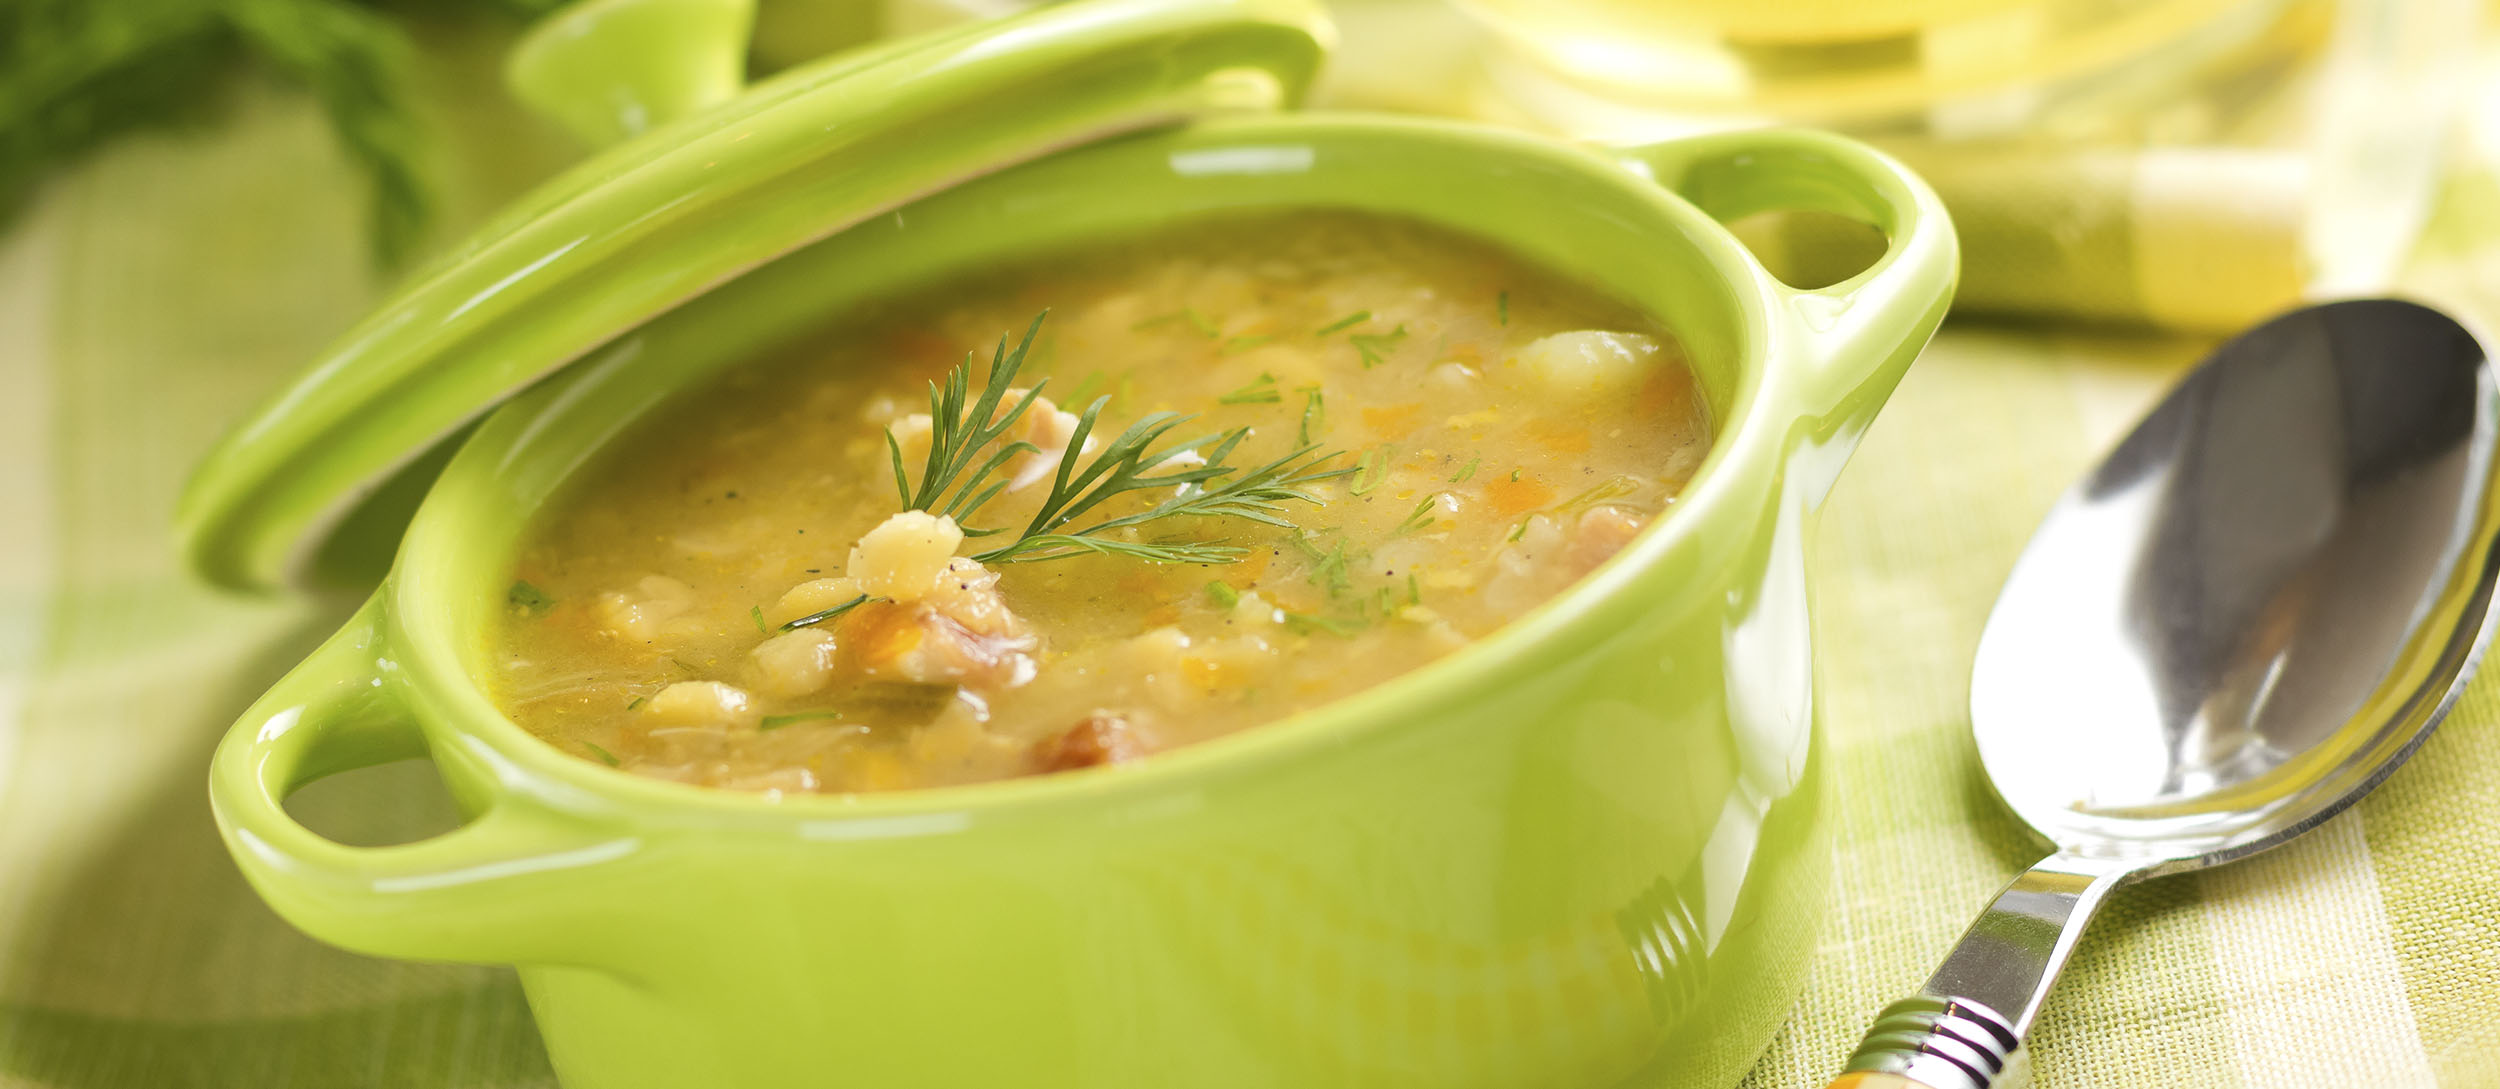 Hernekeitto | Traditional Vegetable Soup From Finland, Northern Europe